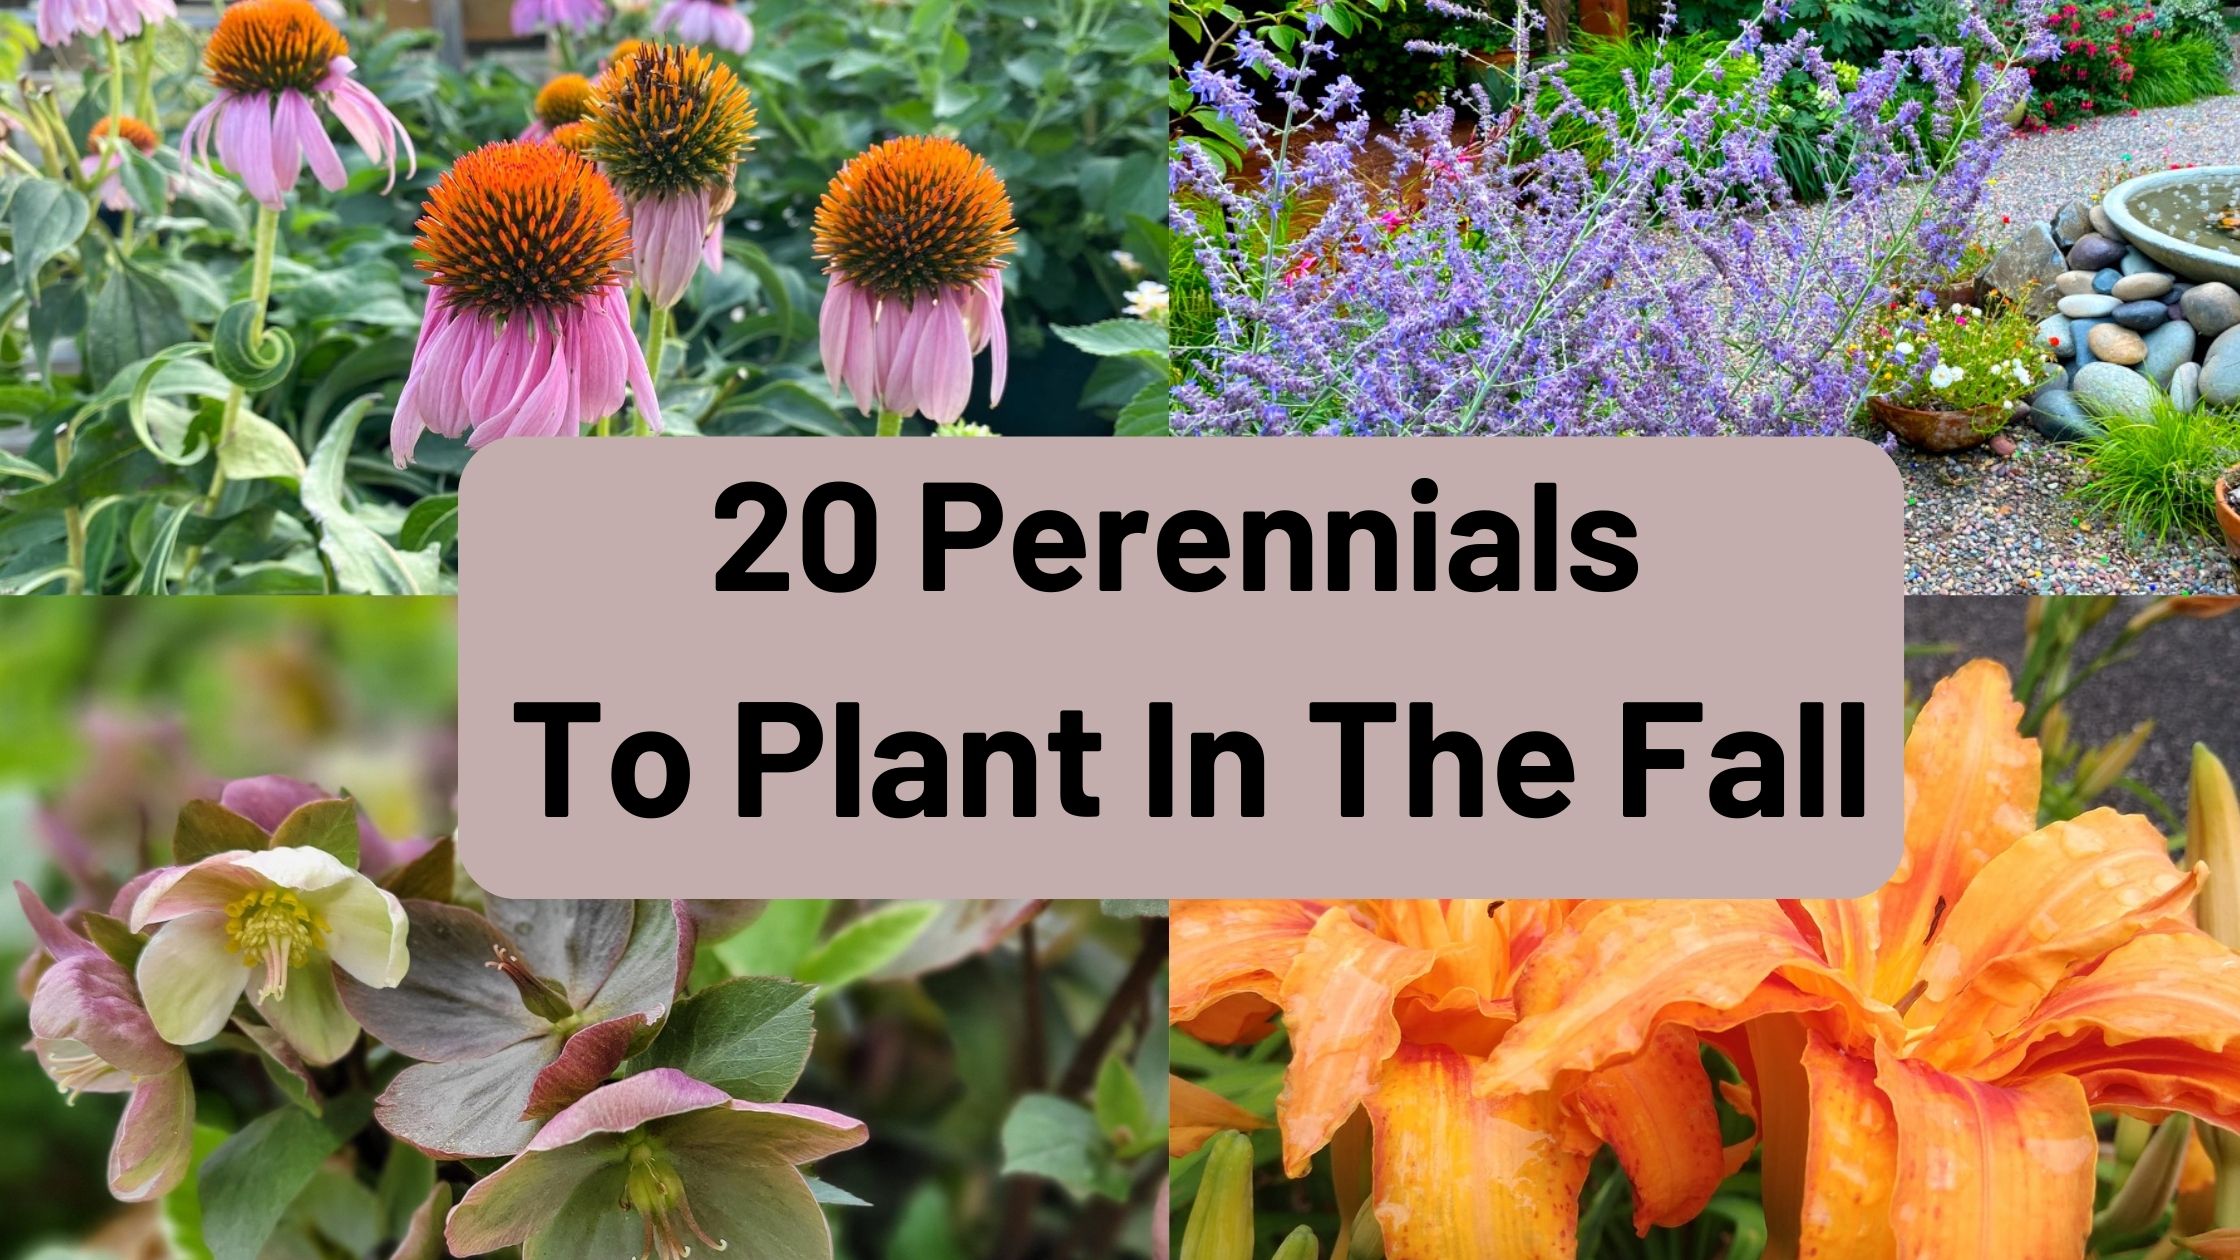 Perennials To Plant In The Fall